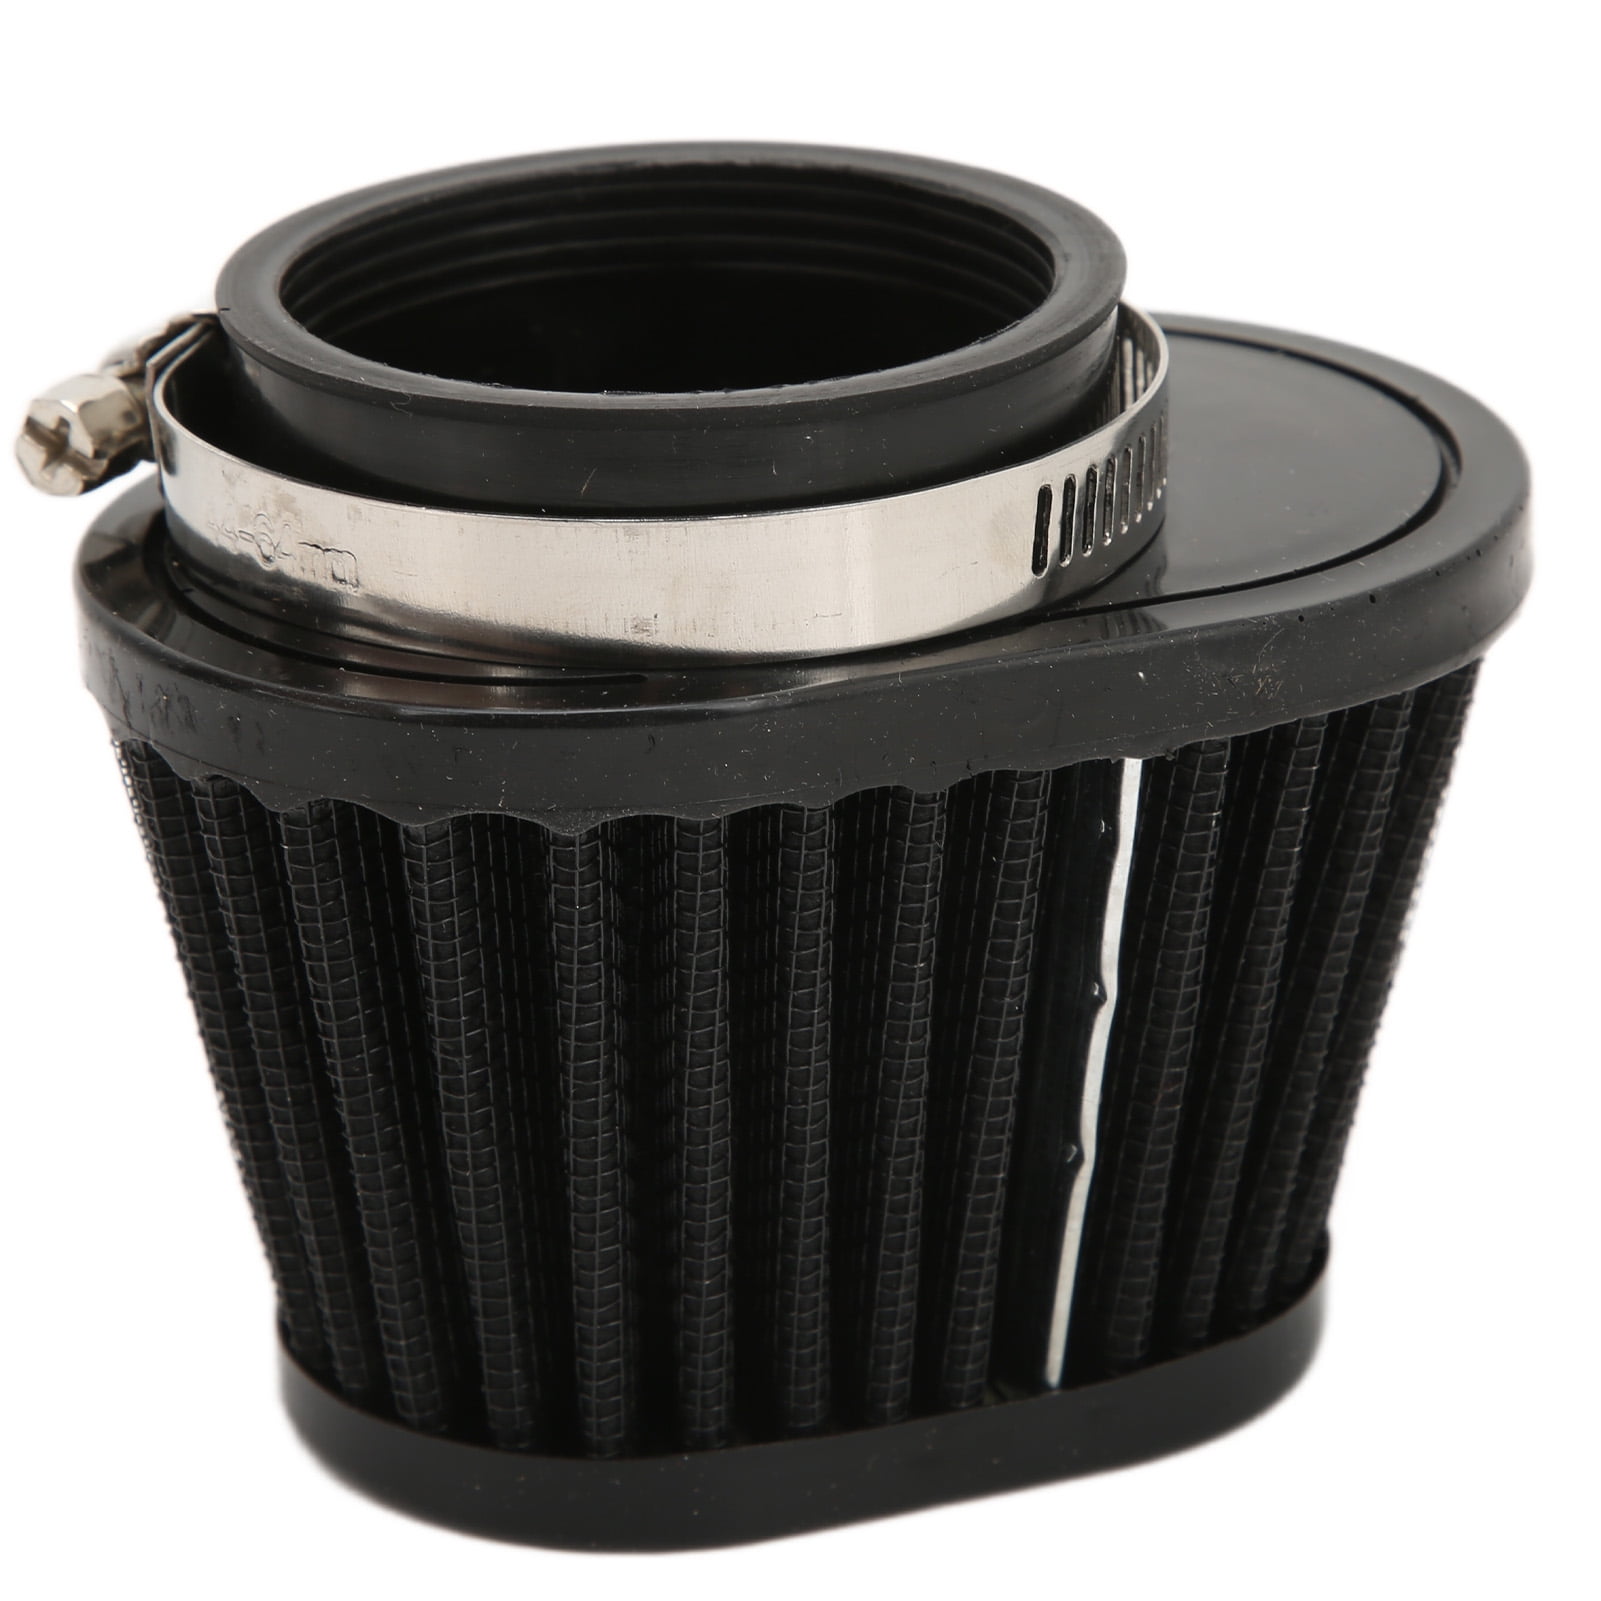 Air Filter Car Cone Air Filter Carb Cleaner Induction Kit Performance Air Filter Pit Bike Plastics Black,51mm